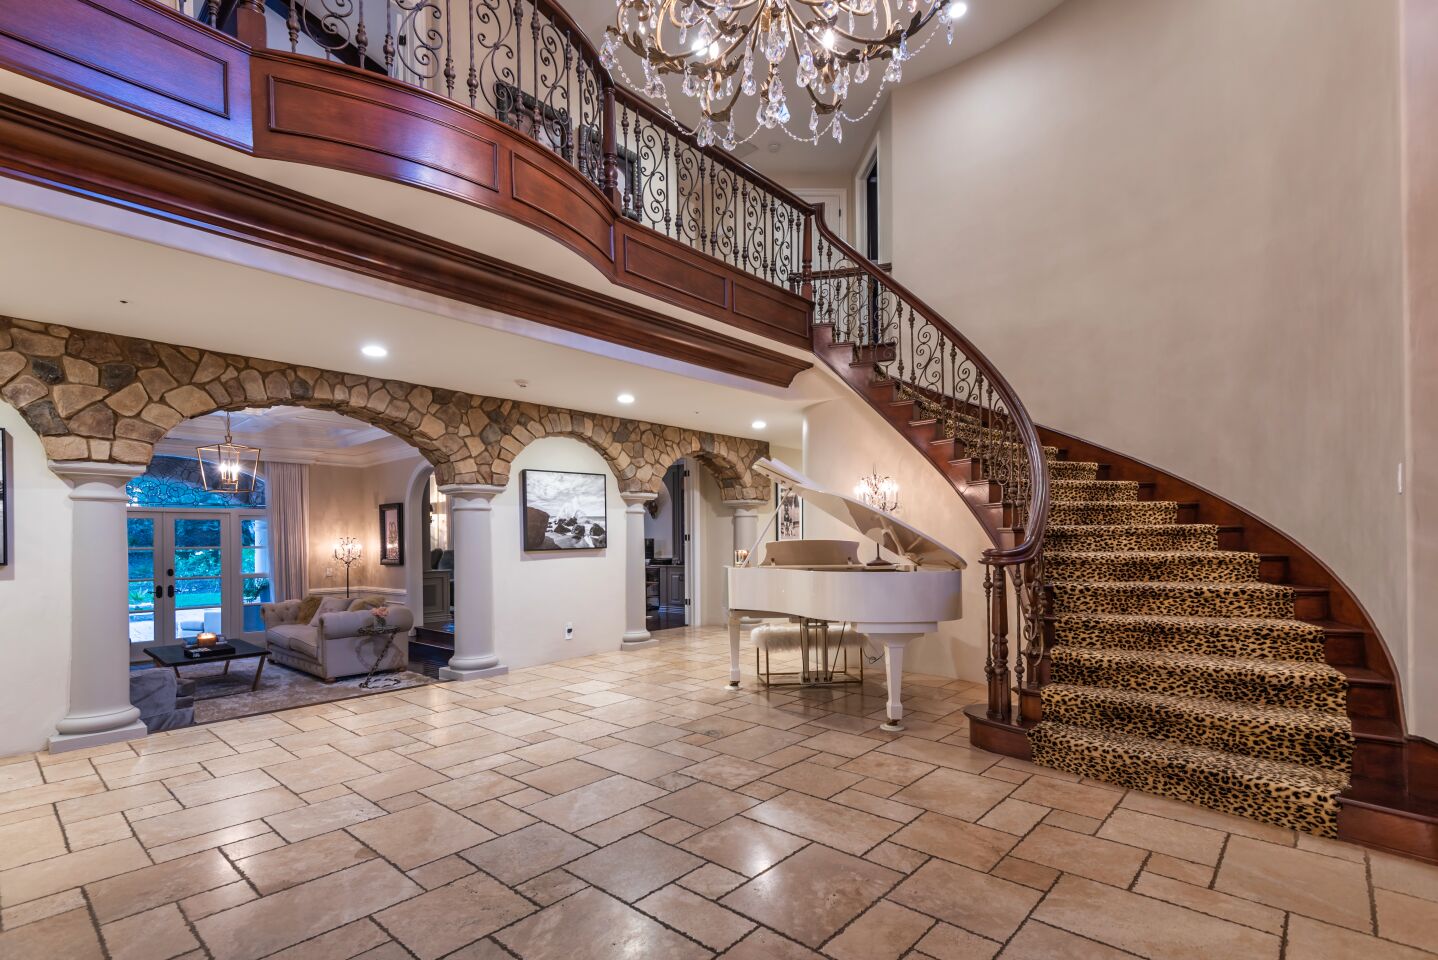 Leopard-print carpet and a white grand piano kick off the roughly 6,700-square-foot floor plan.